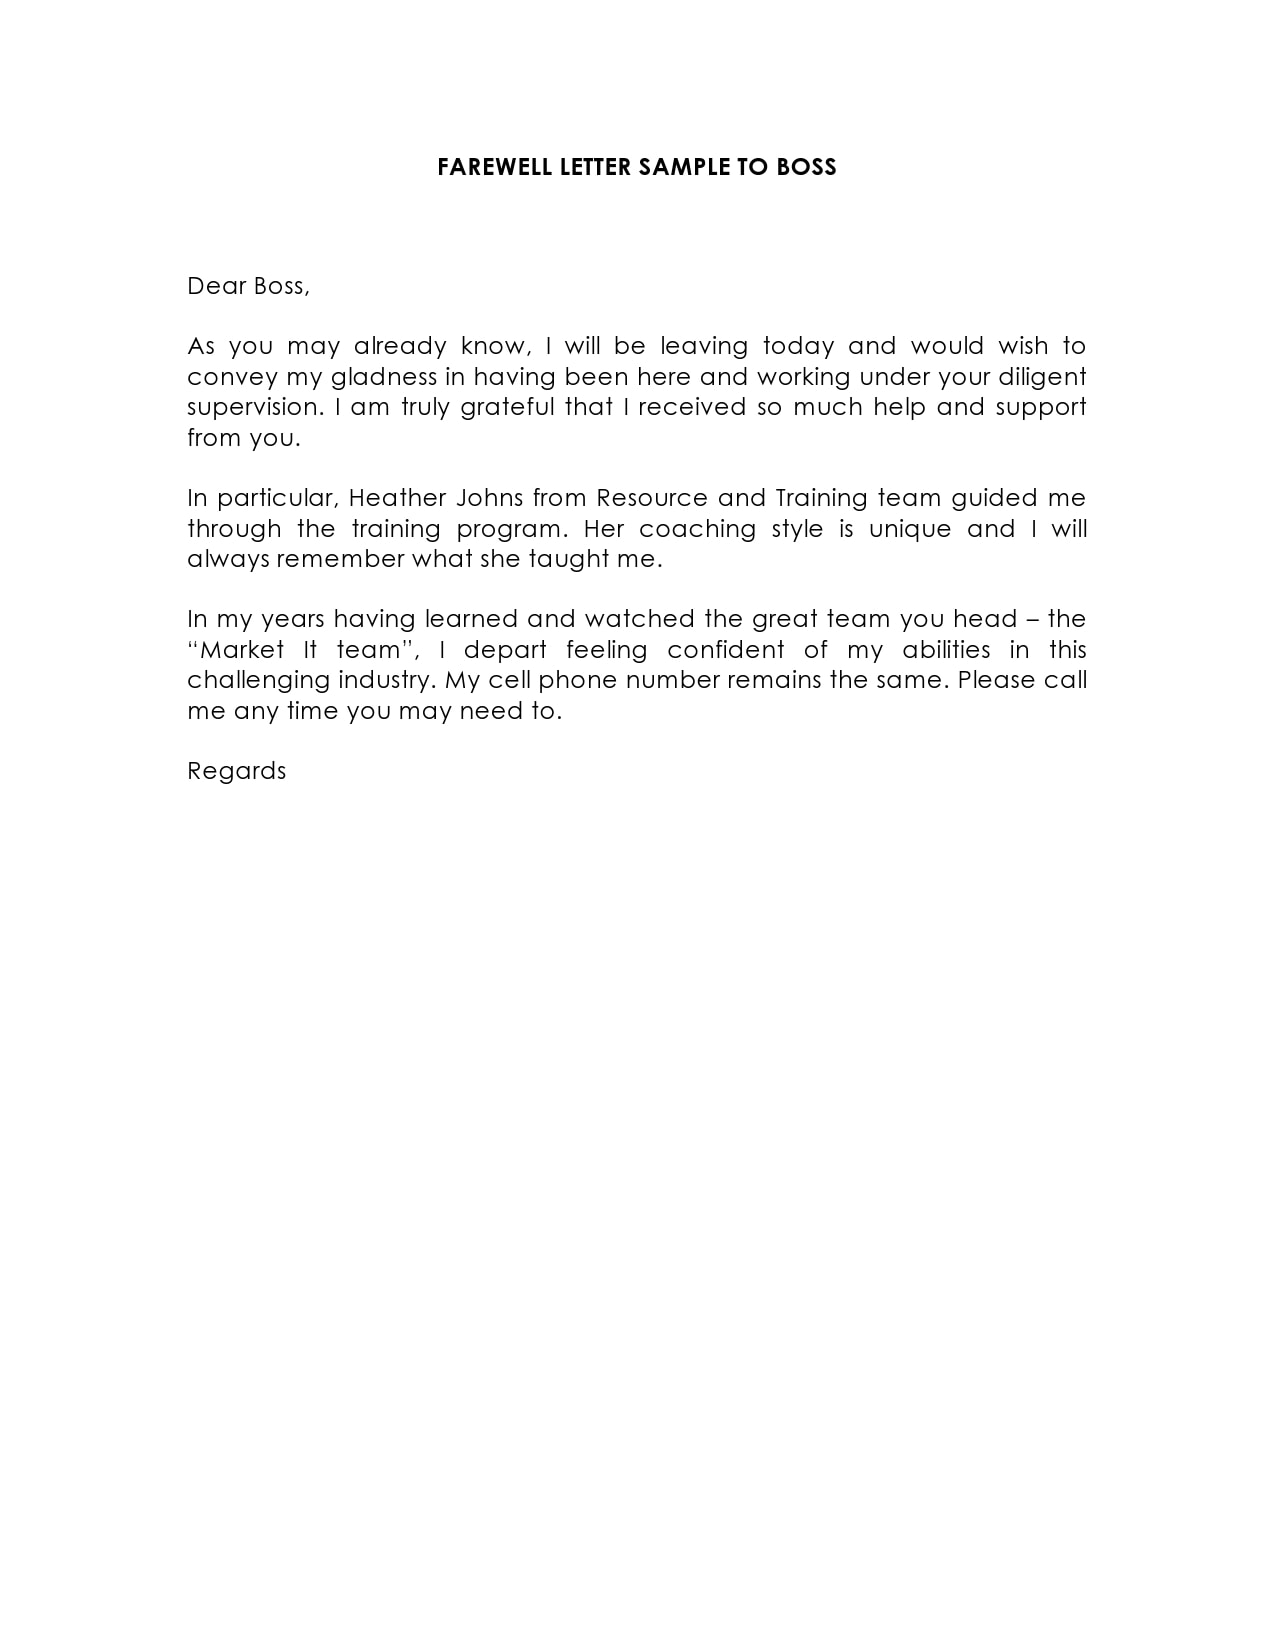 Goodbye Letter To Boss from templatearchive.com